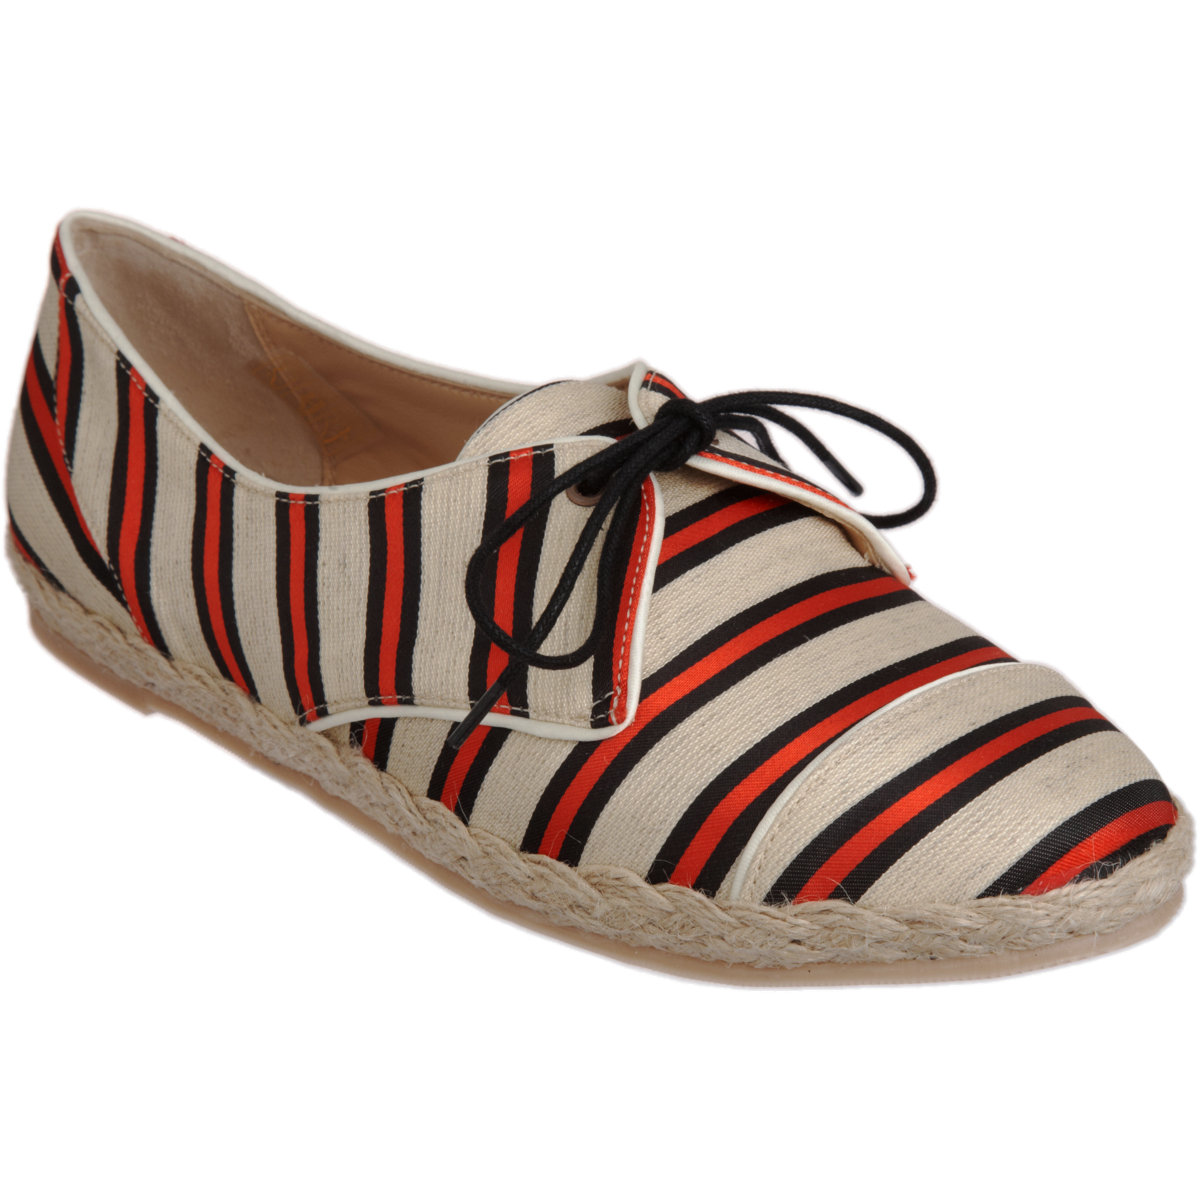 Tabitha Simmons 'Dolly' Oxford Red/Navy Stripe Flats